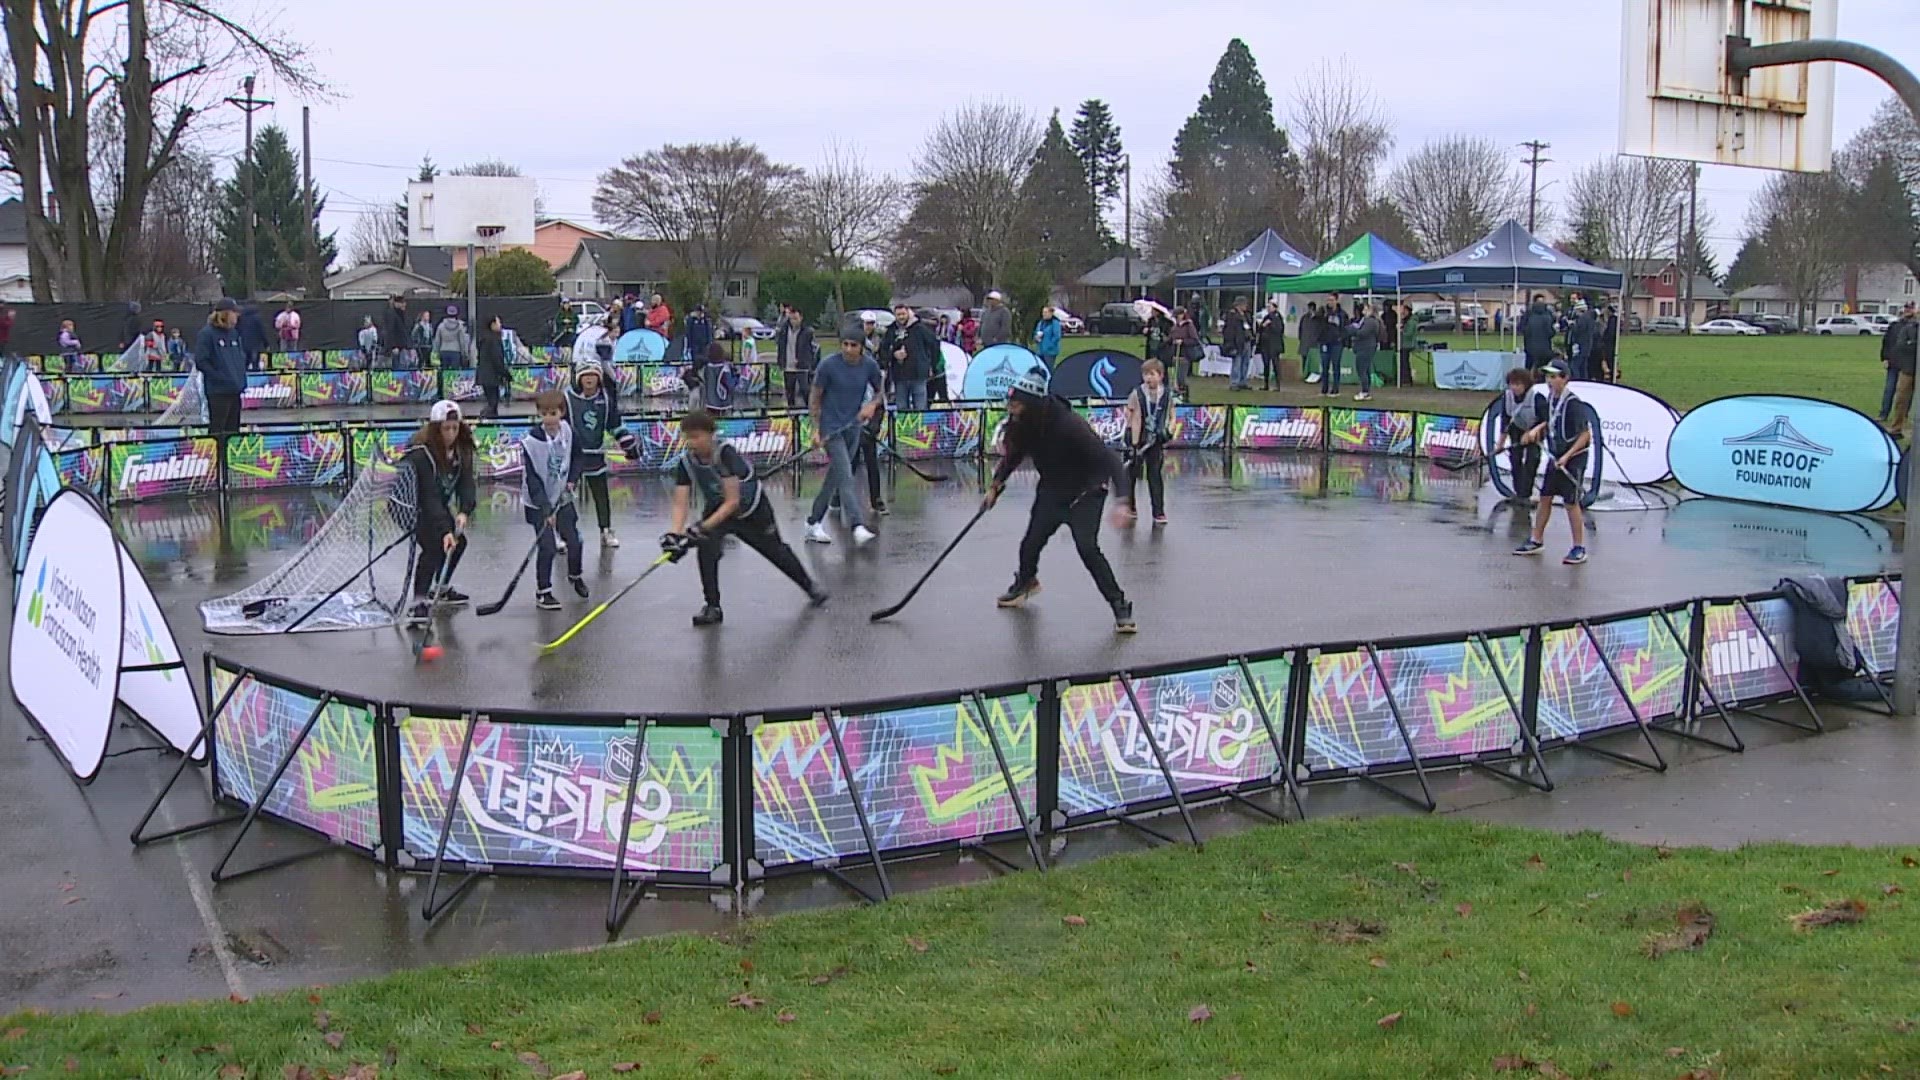 Seattle Kraken teams up with NHL and local partners to refurbish Tacoma park